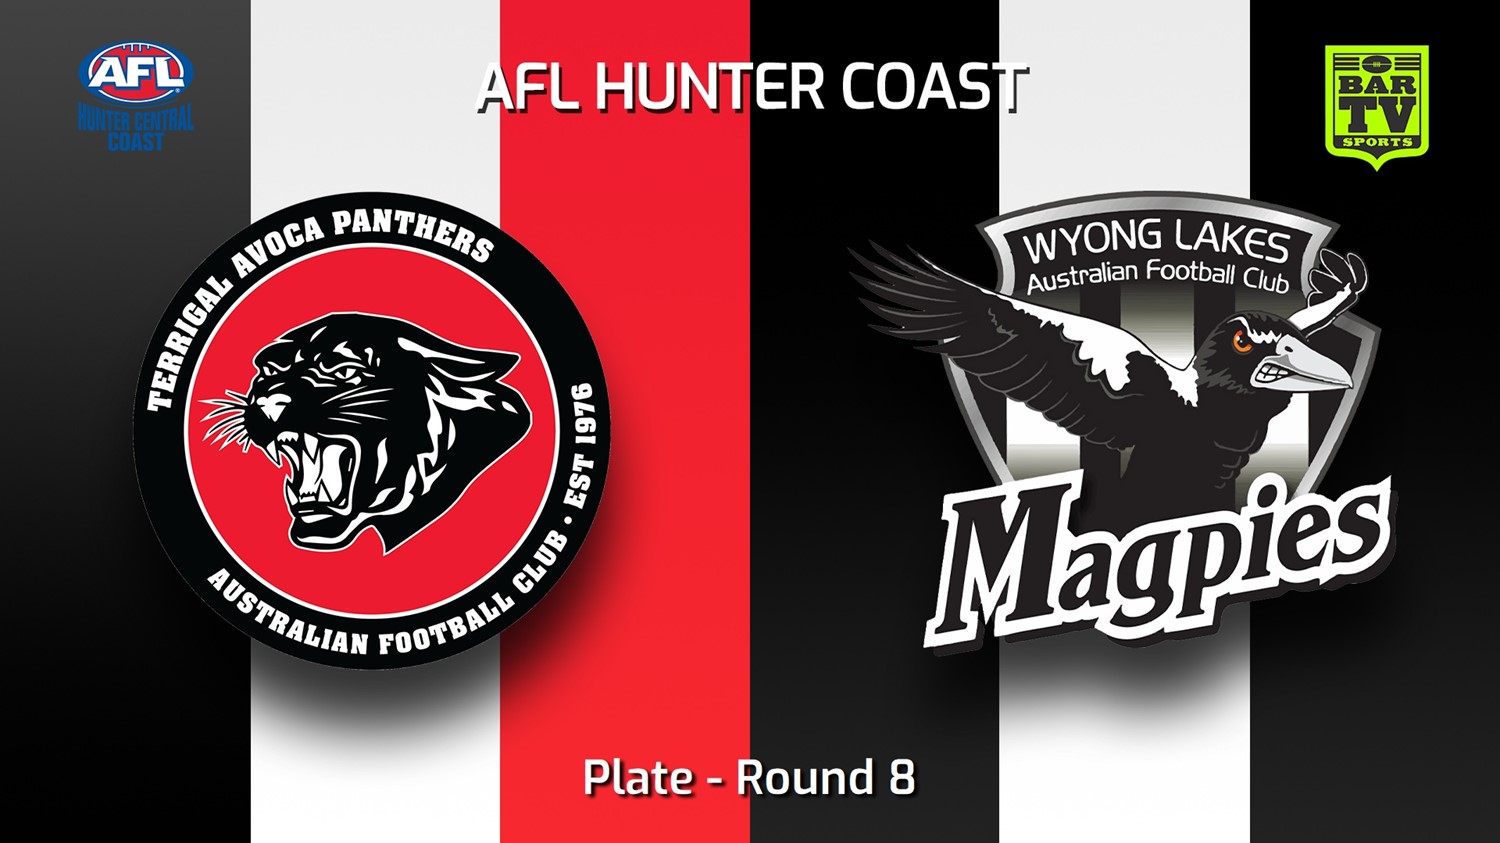 230527-AFL Hunter Central Coast Round 8 - Plate - Terrigal Avoca Panthers v Wyong Lakes Magpies Minigame Slate Image